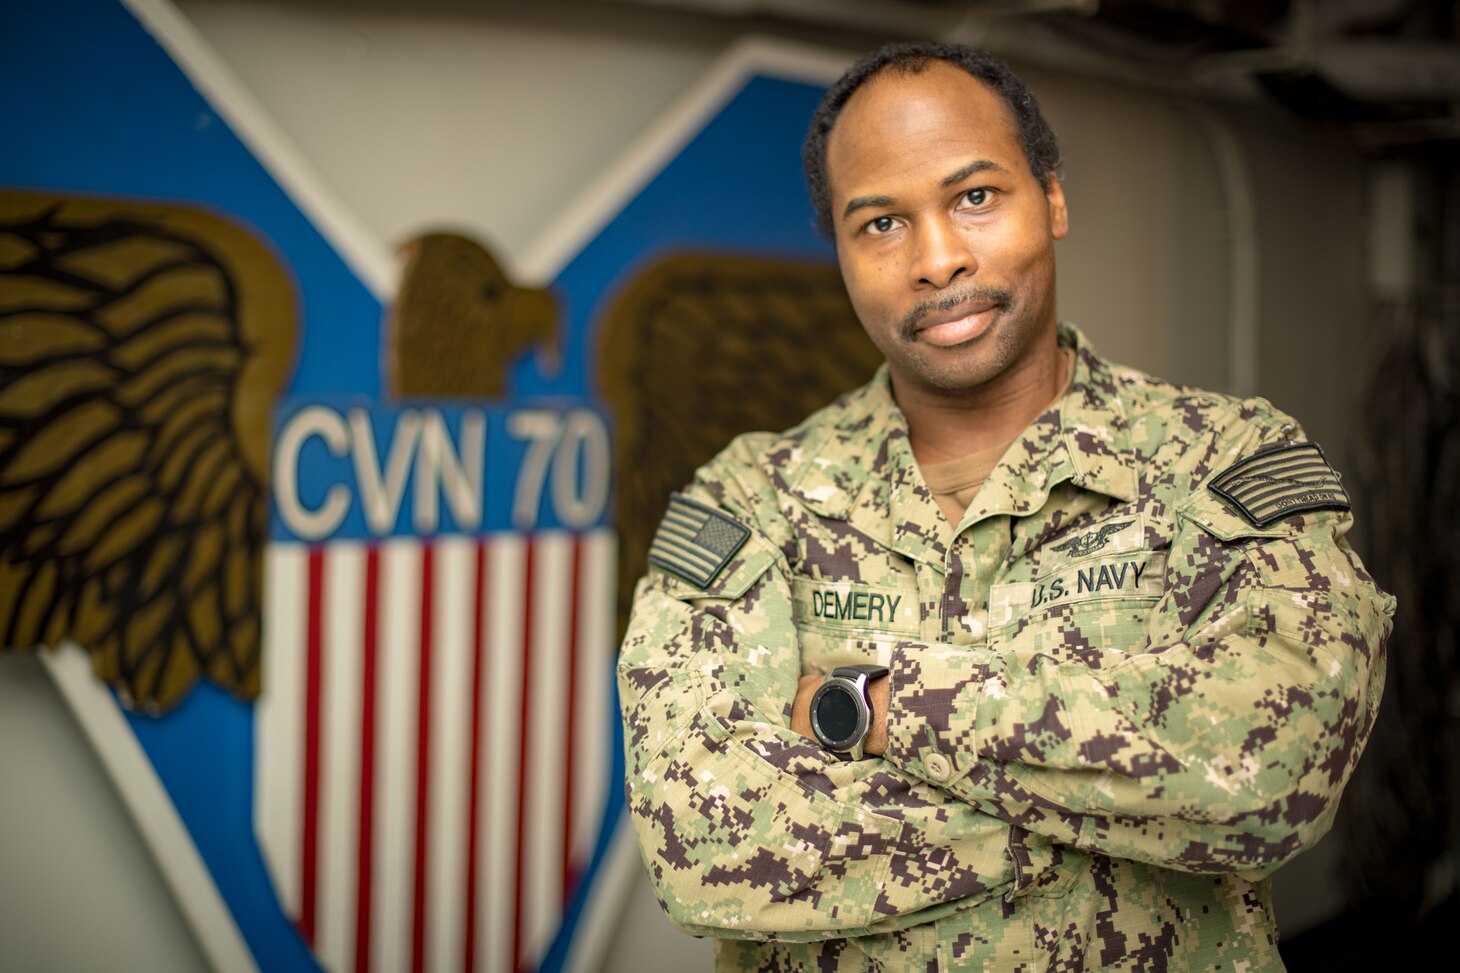 A sailor standing in front of the USS Carl Vinson's crest.